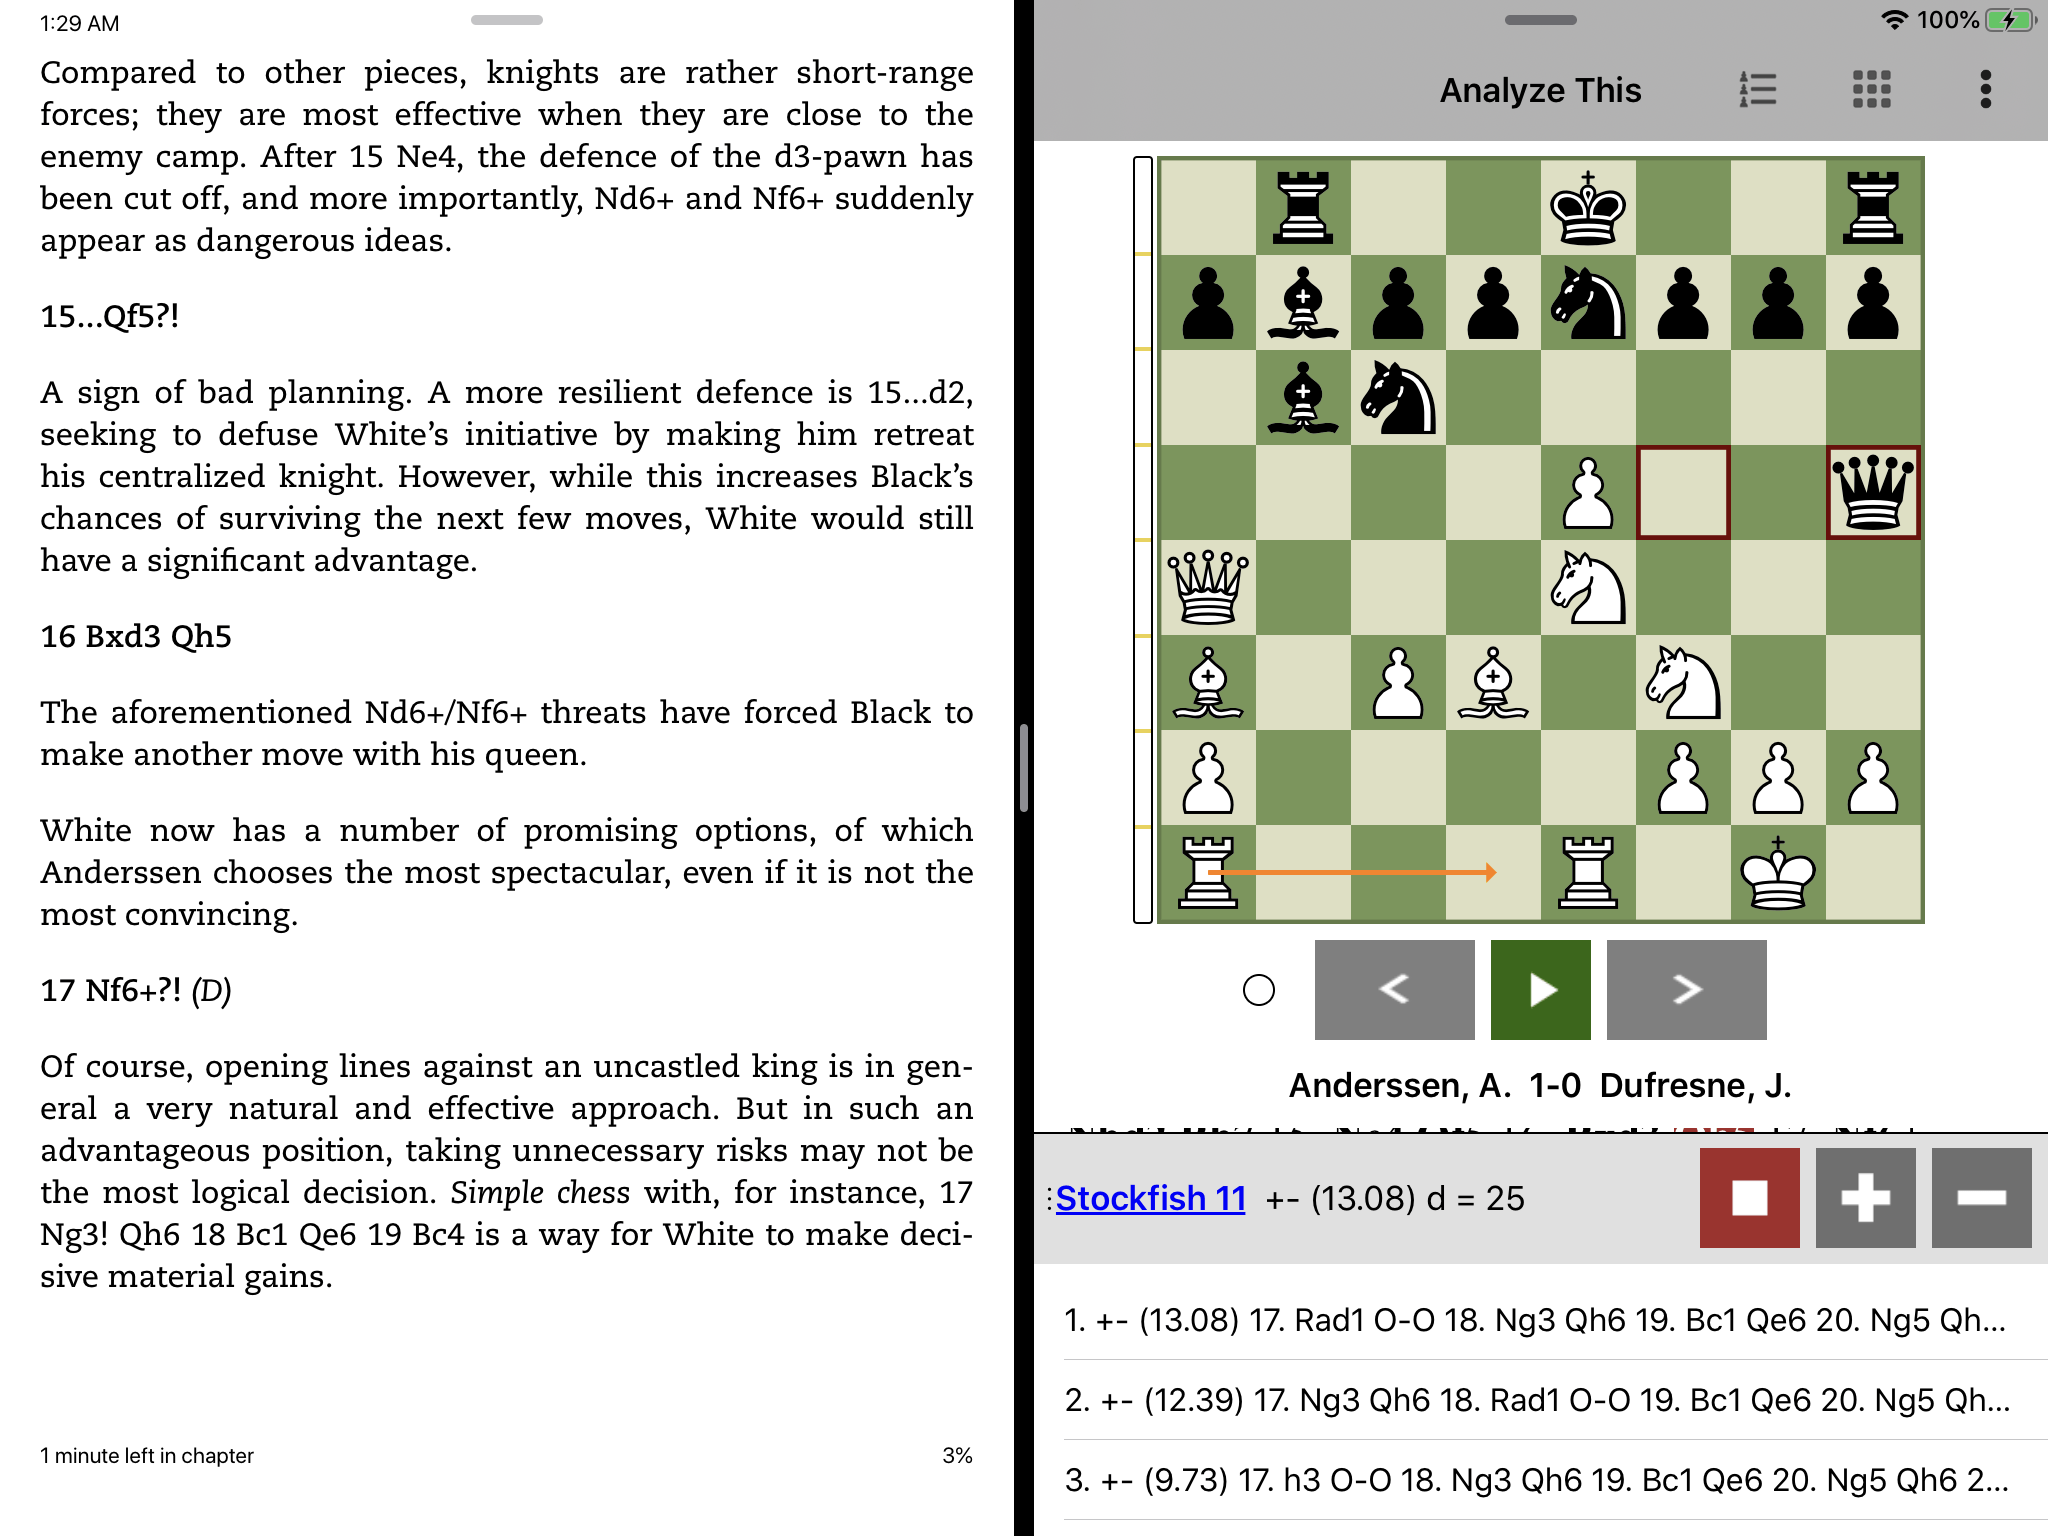 I made chess eBook Reader that uses AI to make chess books interactive  (Update after 2 years). Open a PDF, ePub, or DjVu book, and let it analyze  it, once finished, double-click